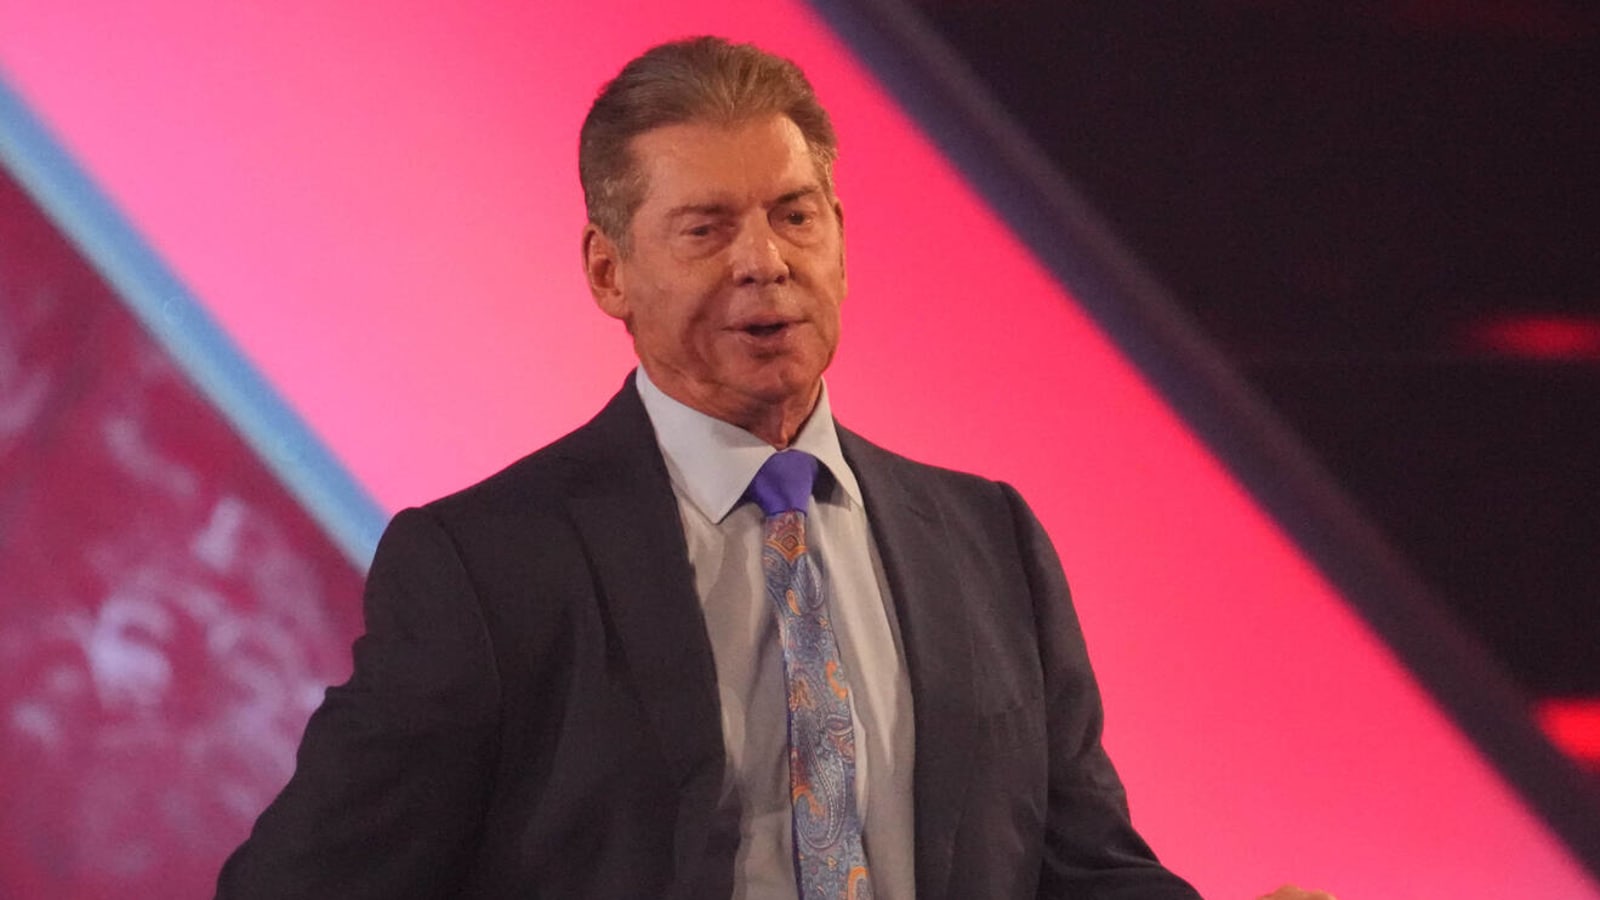 Vince McMahon resigns from TKO in wake of allegations